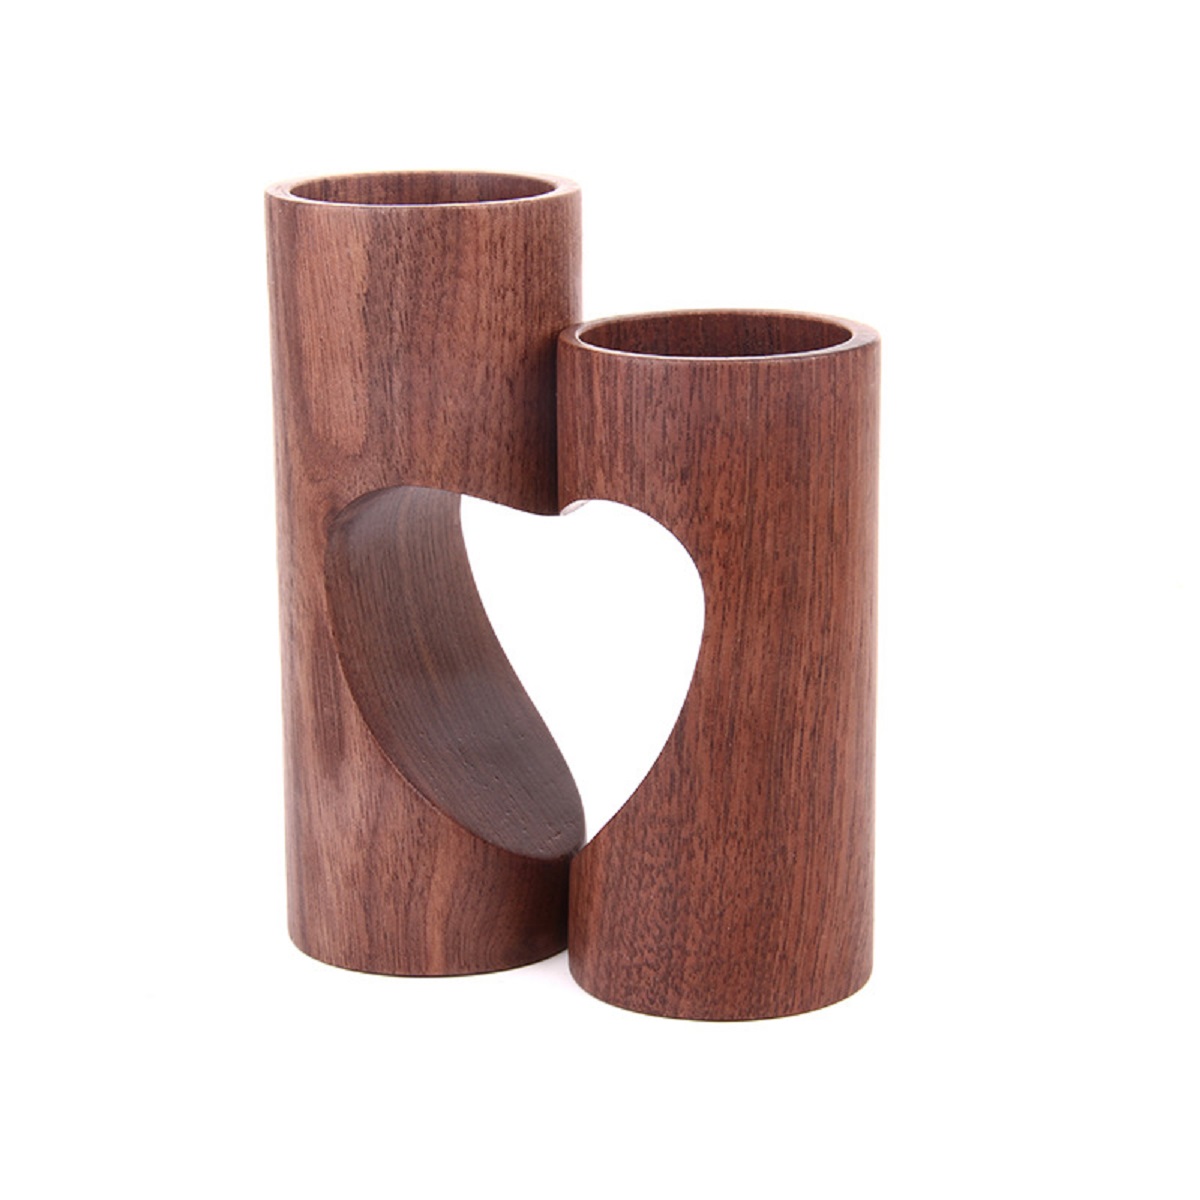 Sweet Heart Wooden Candle Holder